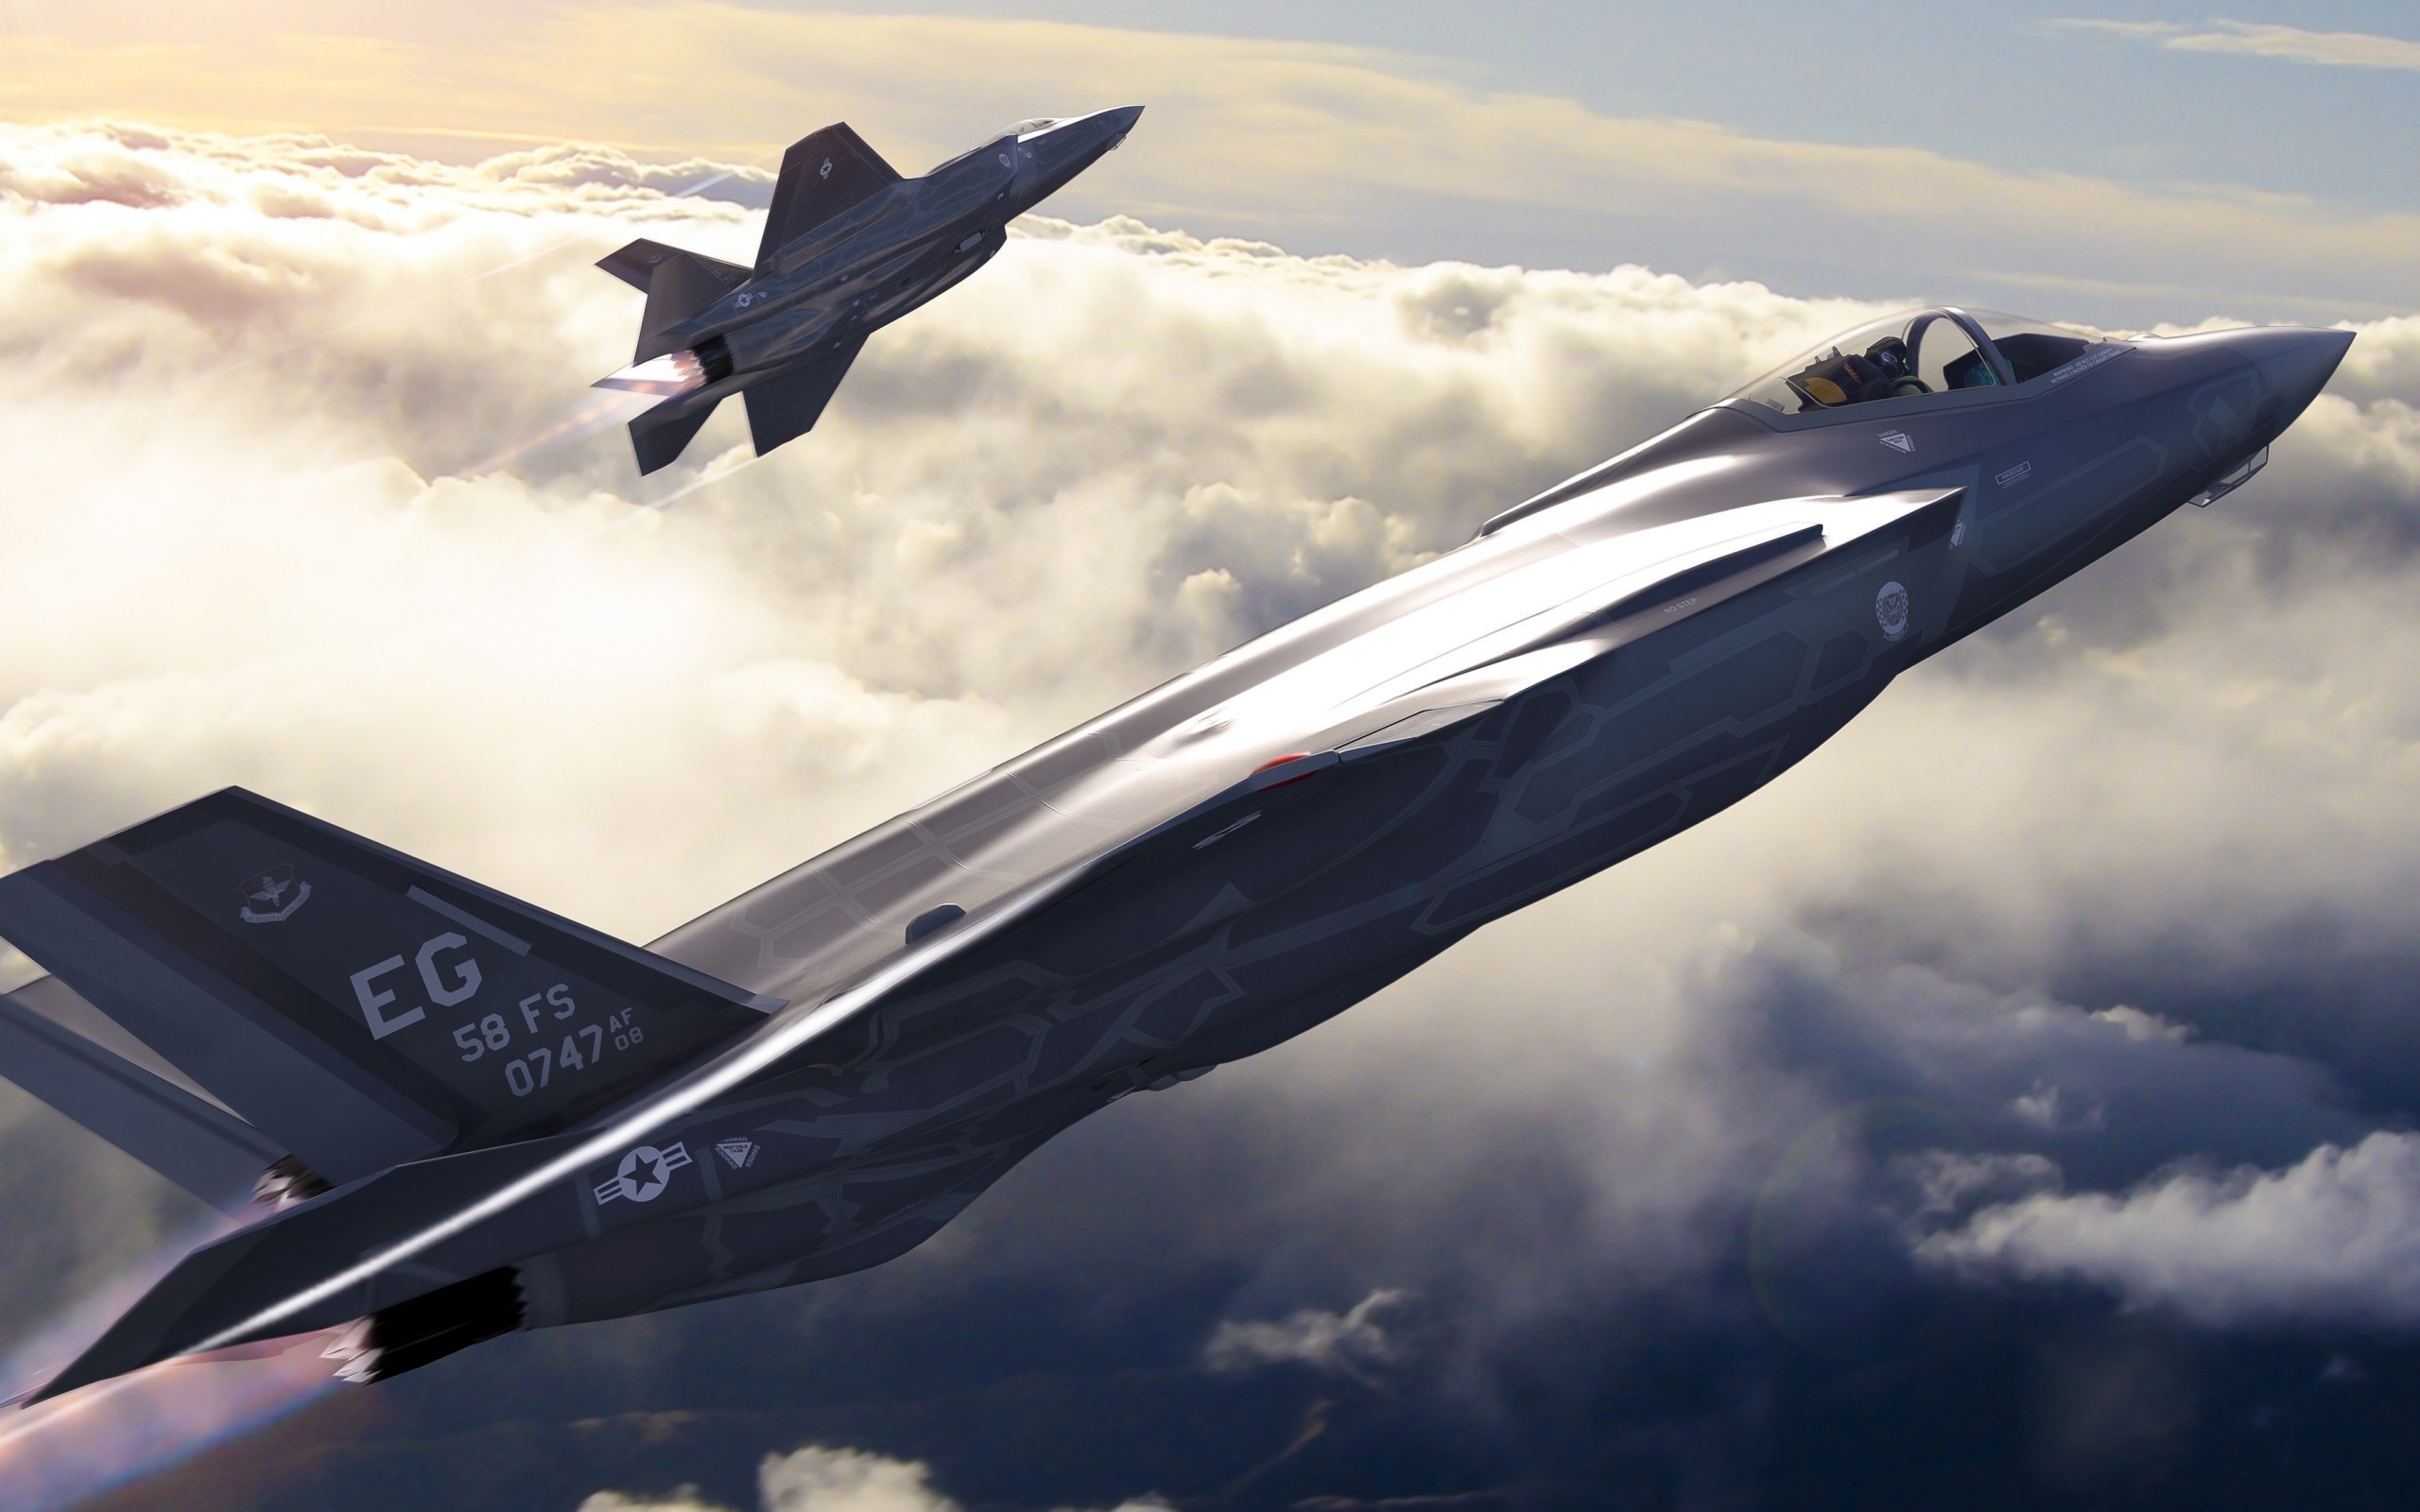 Elevate your Screen with Lockheed Martin Wallpapers  Lockheed Martin